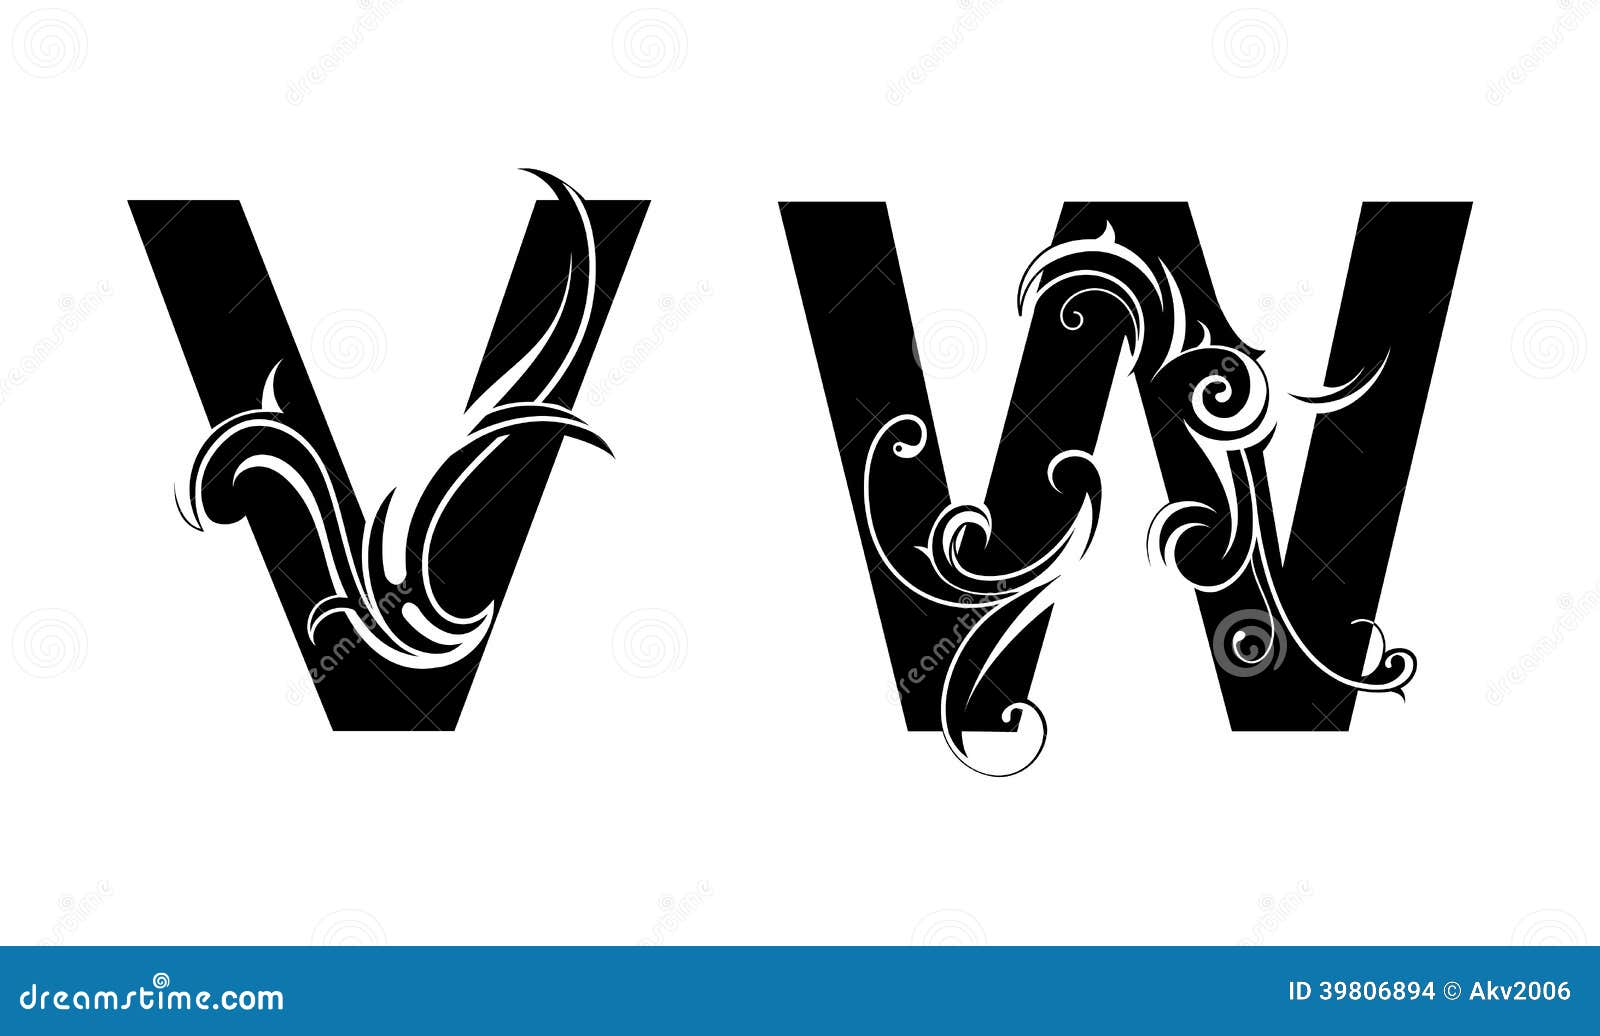 Artistic font type stock vector. Illustration of decoration - 39806894